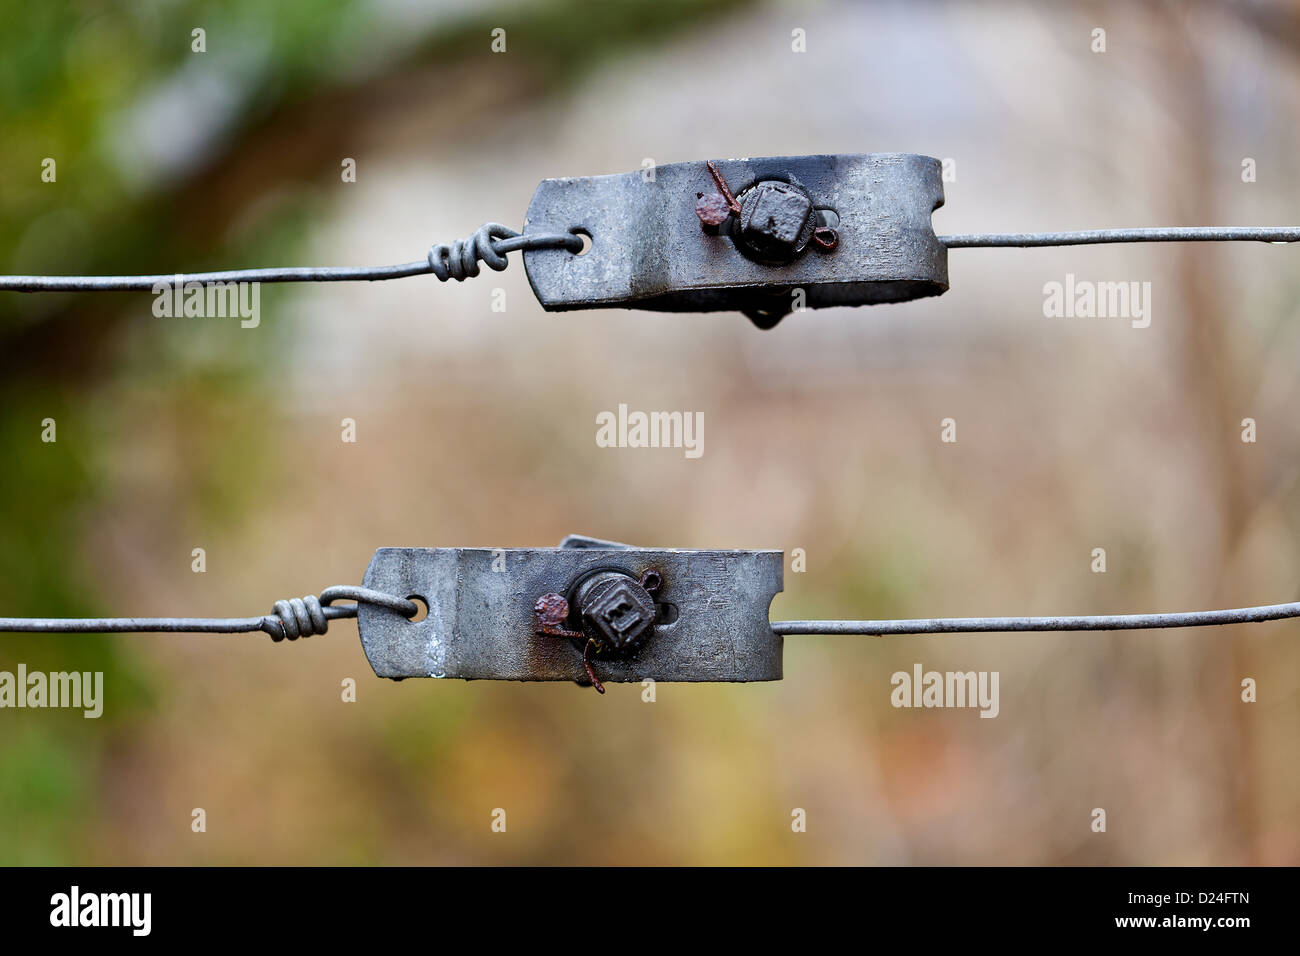 Metal tensioners / joiners on a wire fence Stock Photo